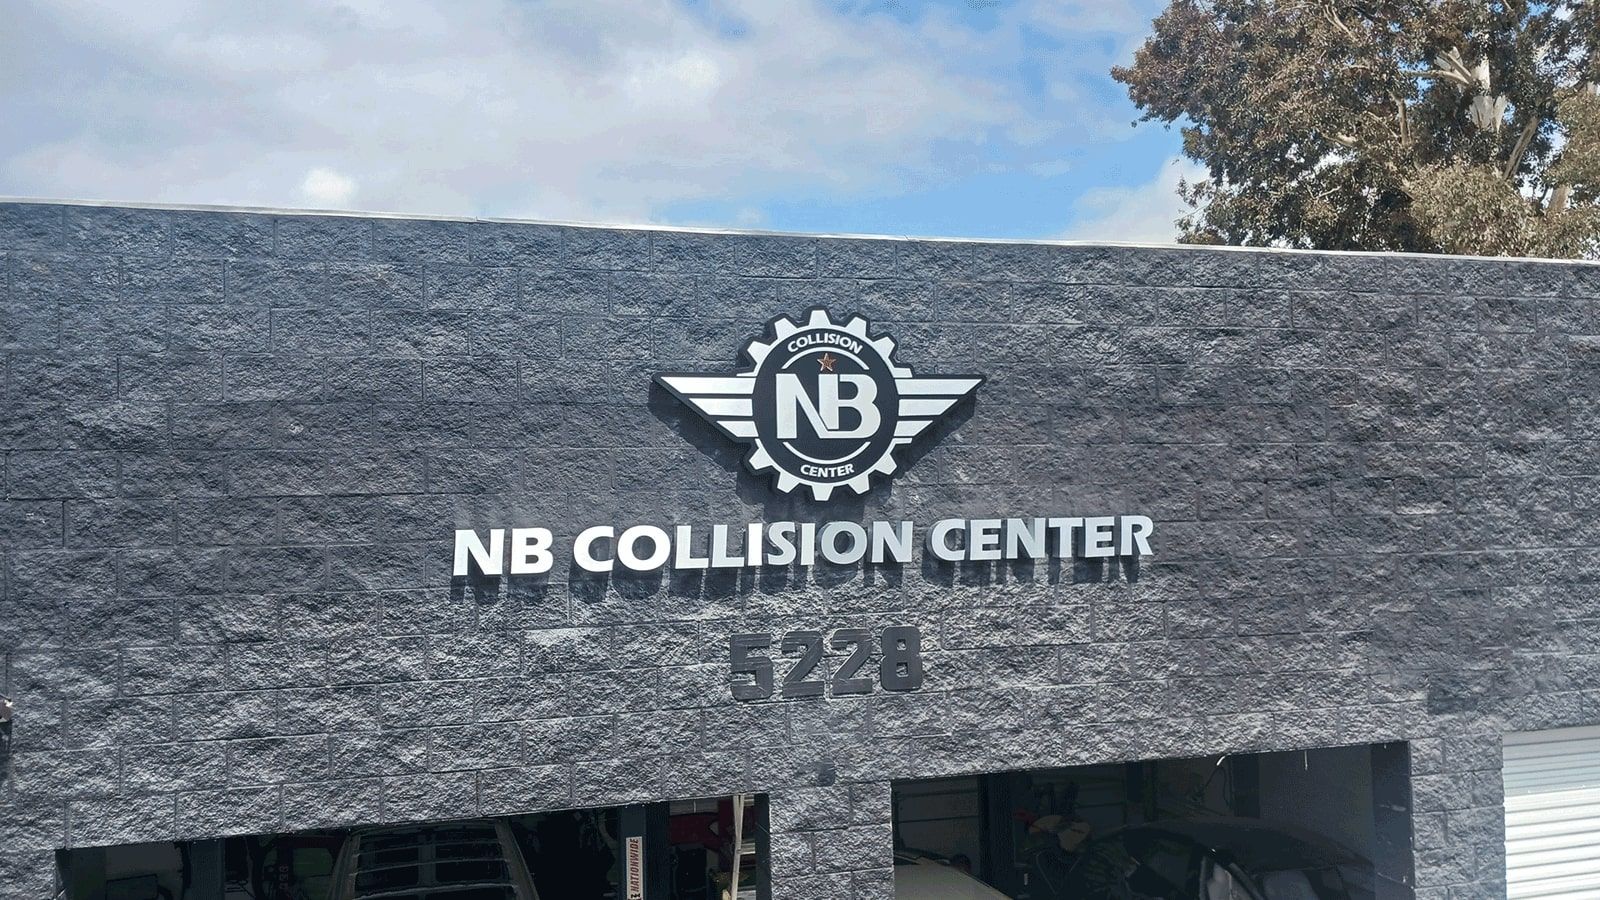 NB Collision Center light up signs set up on the facade